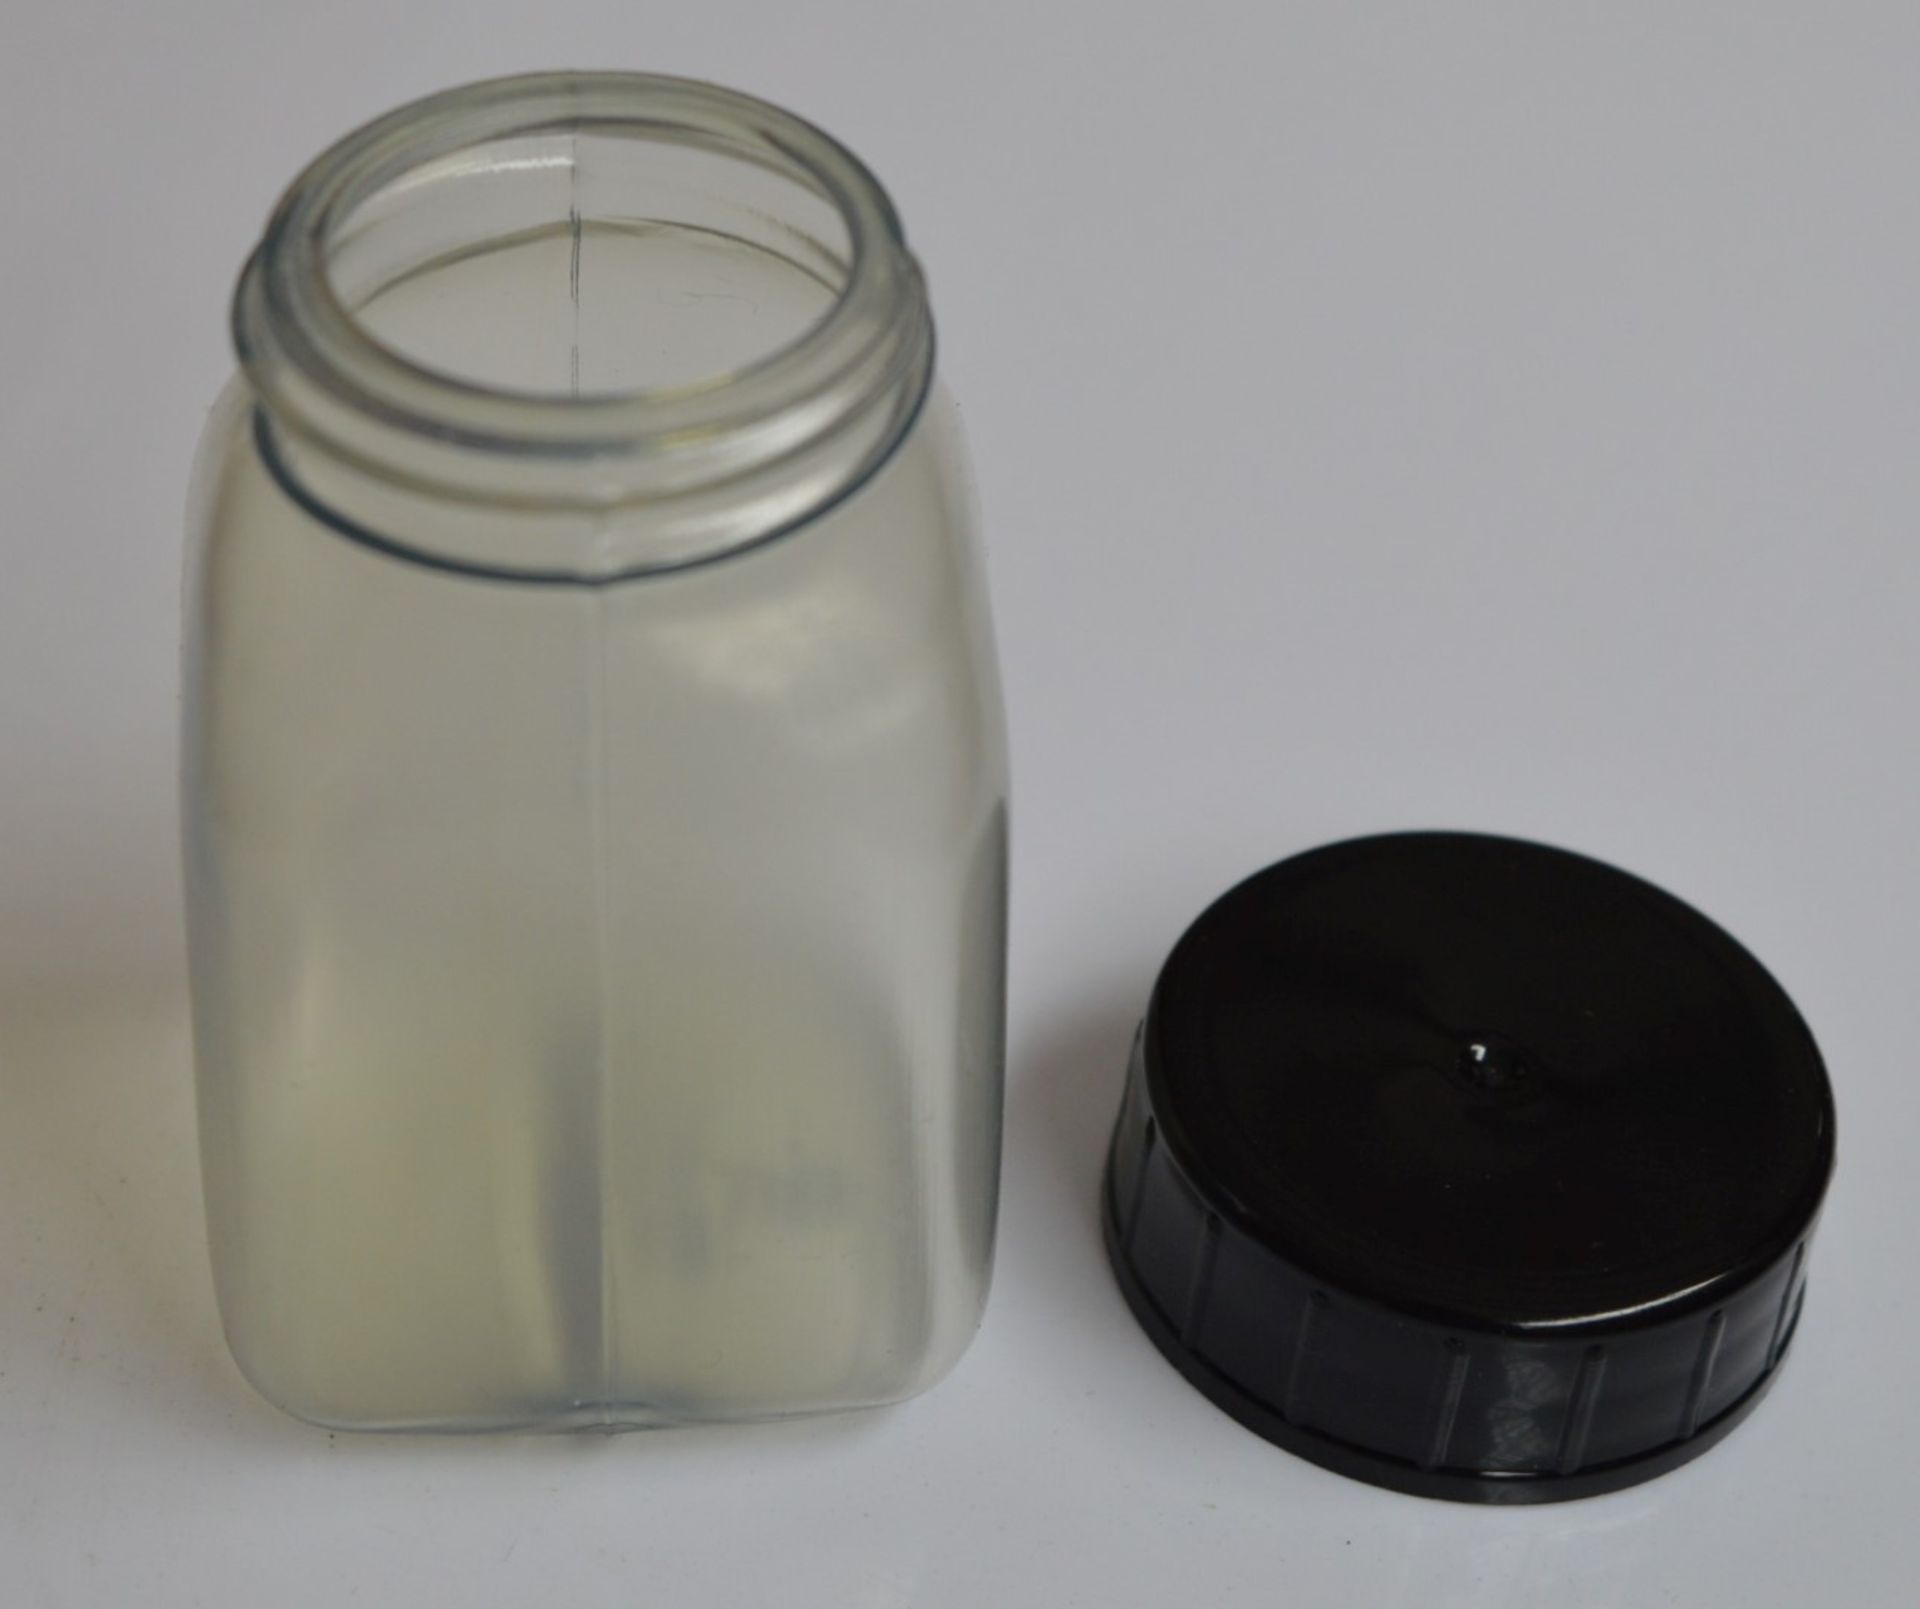 100 x Wide Neck Container Bottles With Leakproof Lids and PE Foam Inserts - 50ml Capacity - 38.